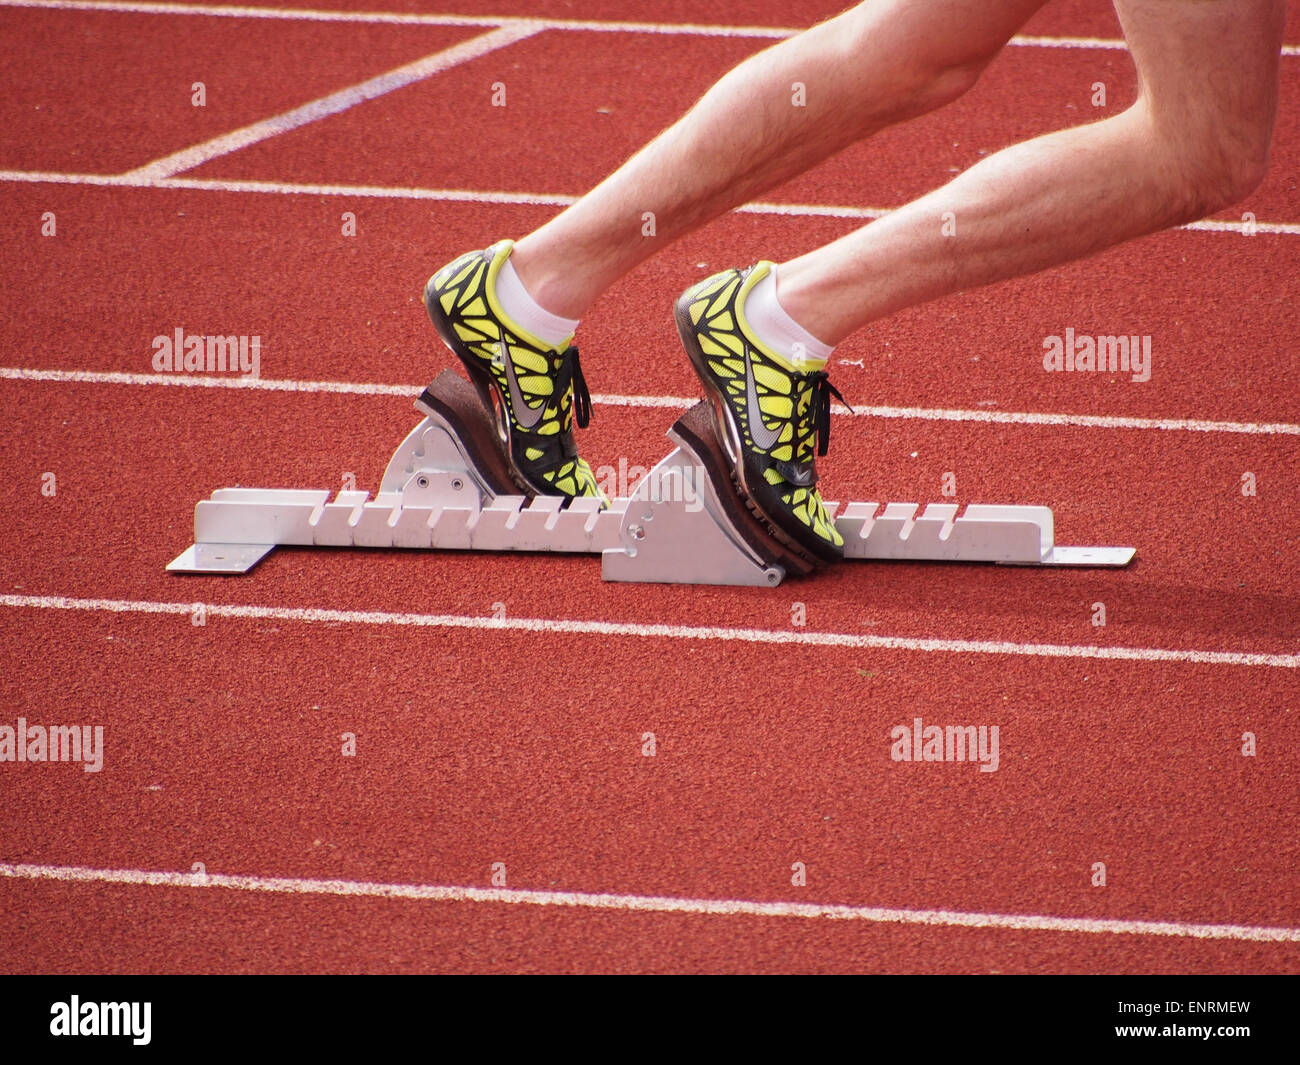 An Athletes feet placed firmly onto starting blocks, ready to start a race Stock Photo